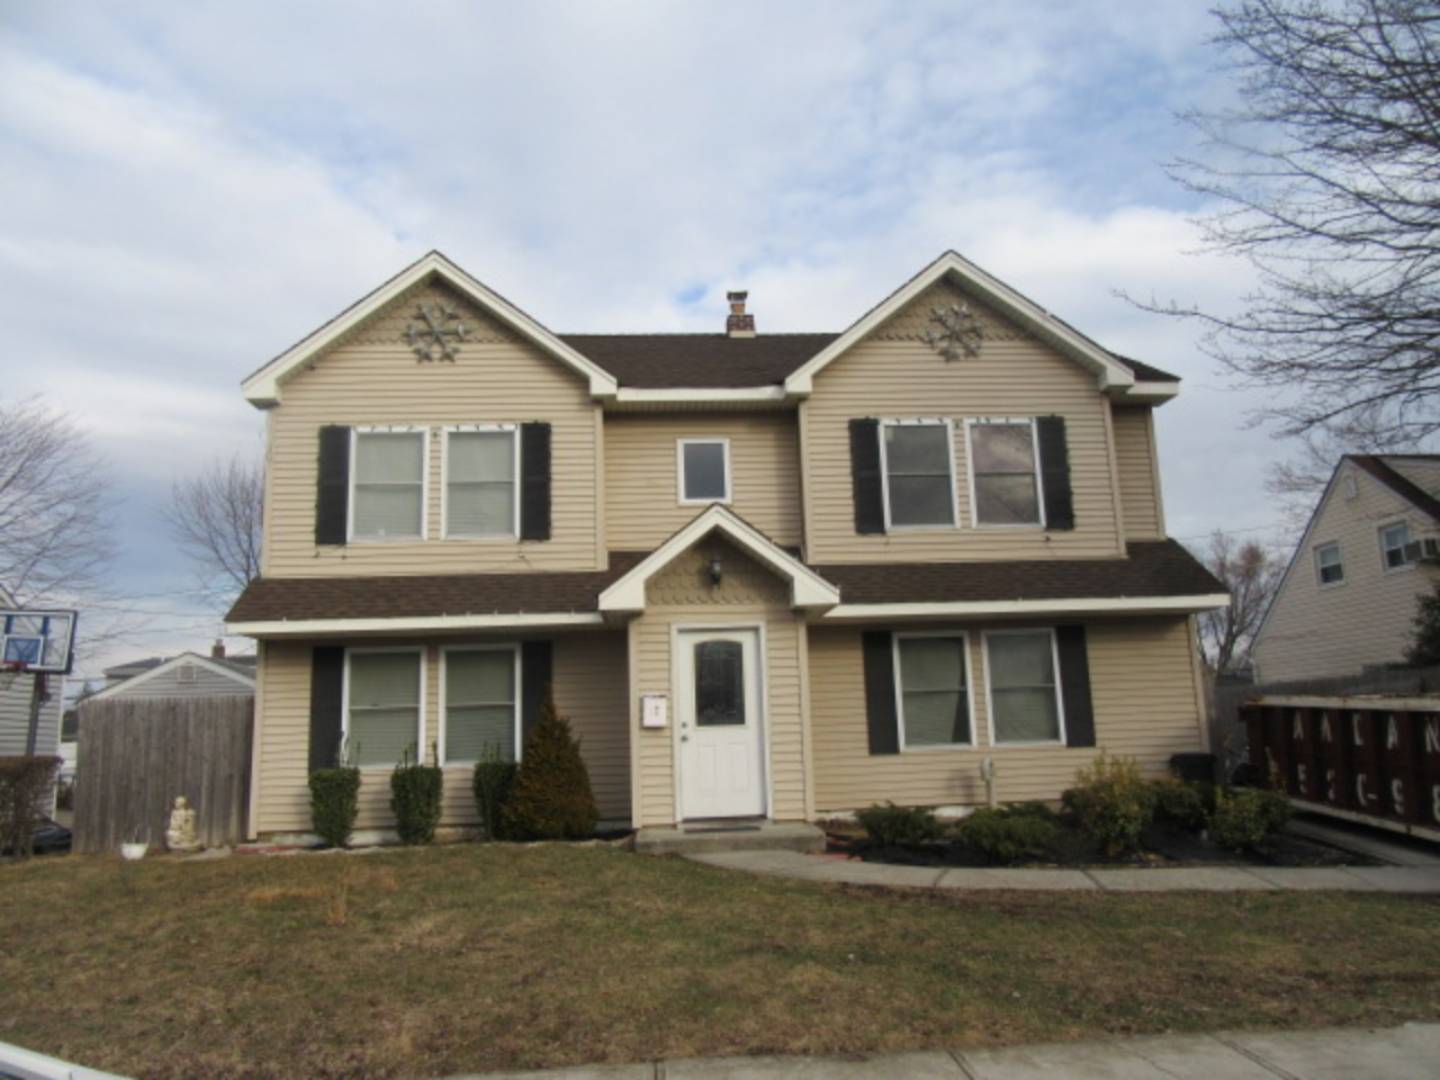 17 Academy Ln., Levittown, NY 11756 (Sold NYStateMLS Listing #10465984)